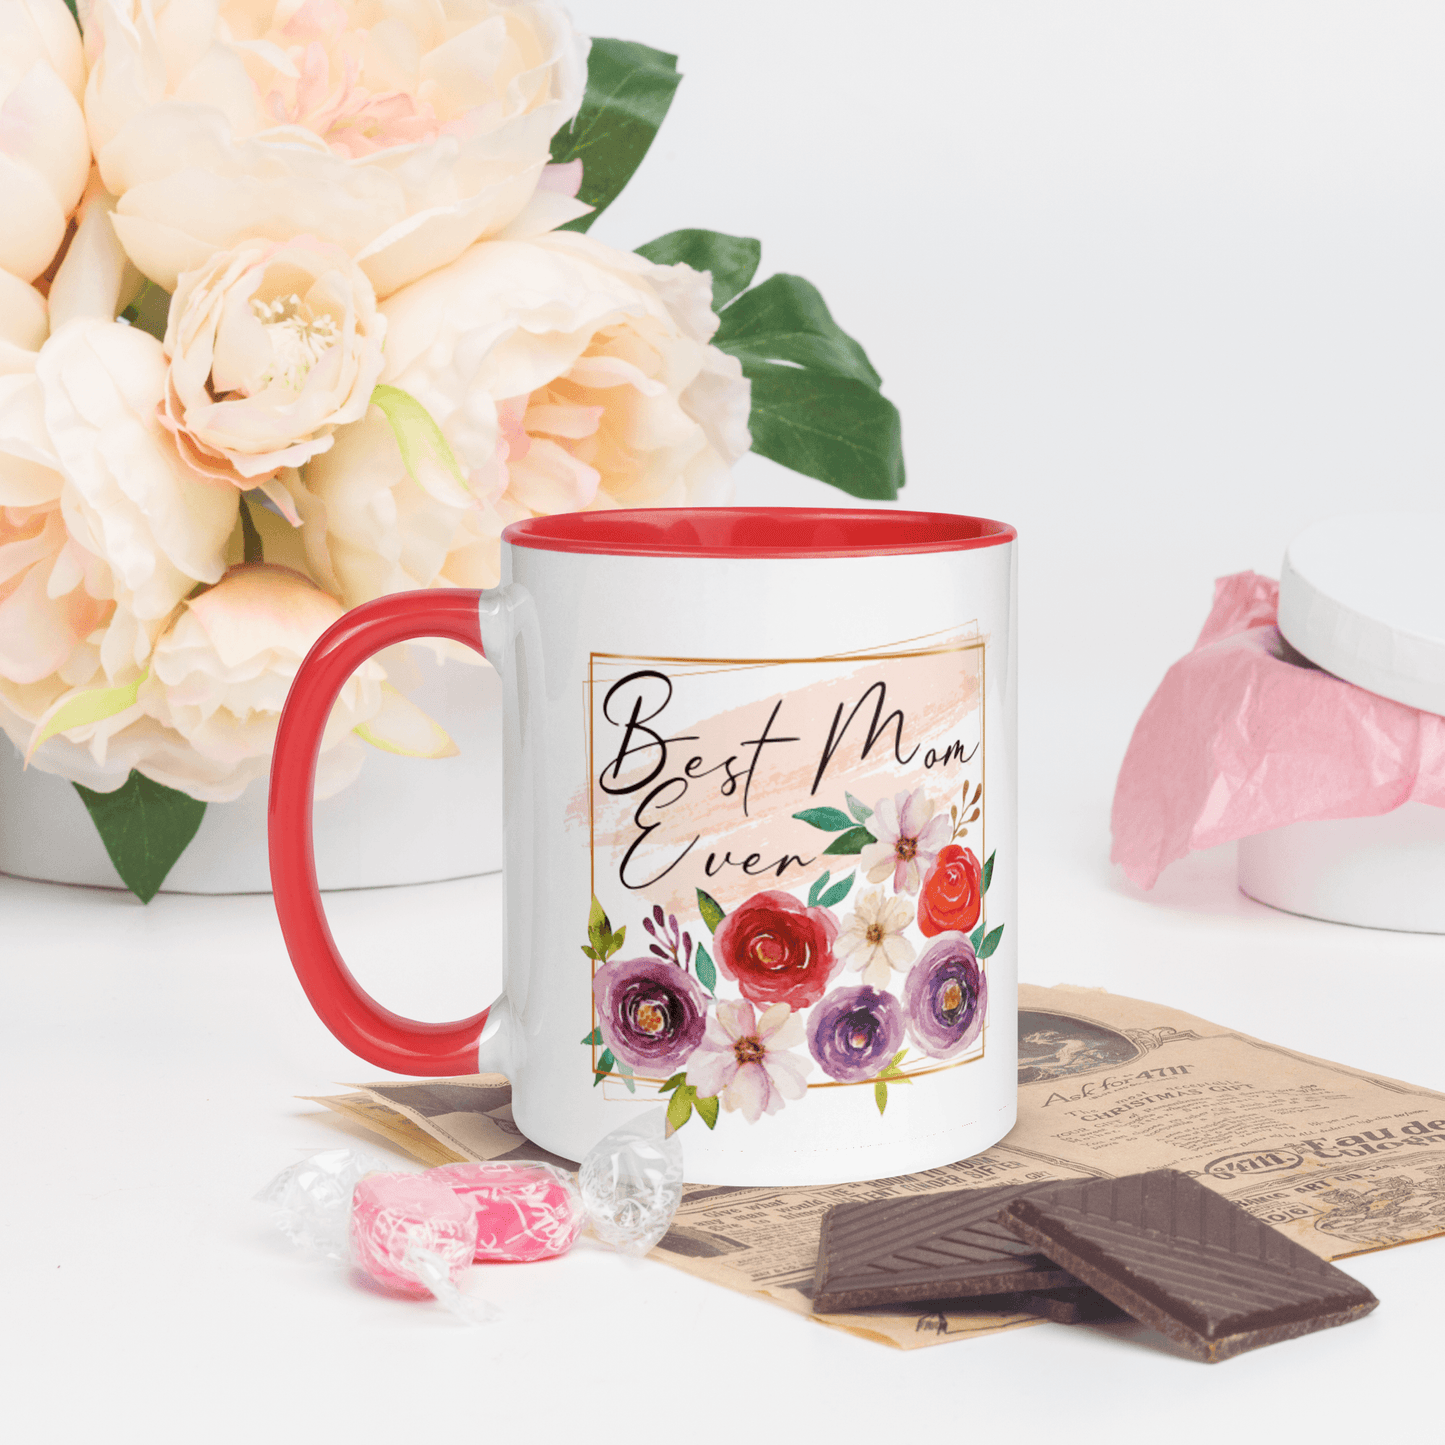 Best Mom Ever! ❤️ Ceramic Mug with Color Accent (Available in Various Colors!) - The Grateful Hearts